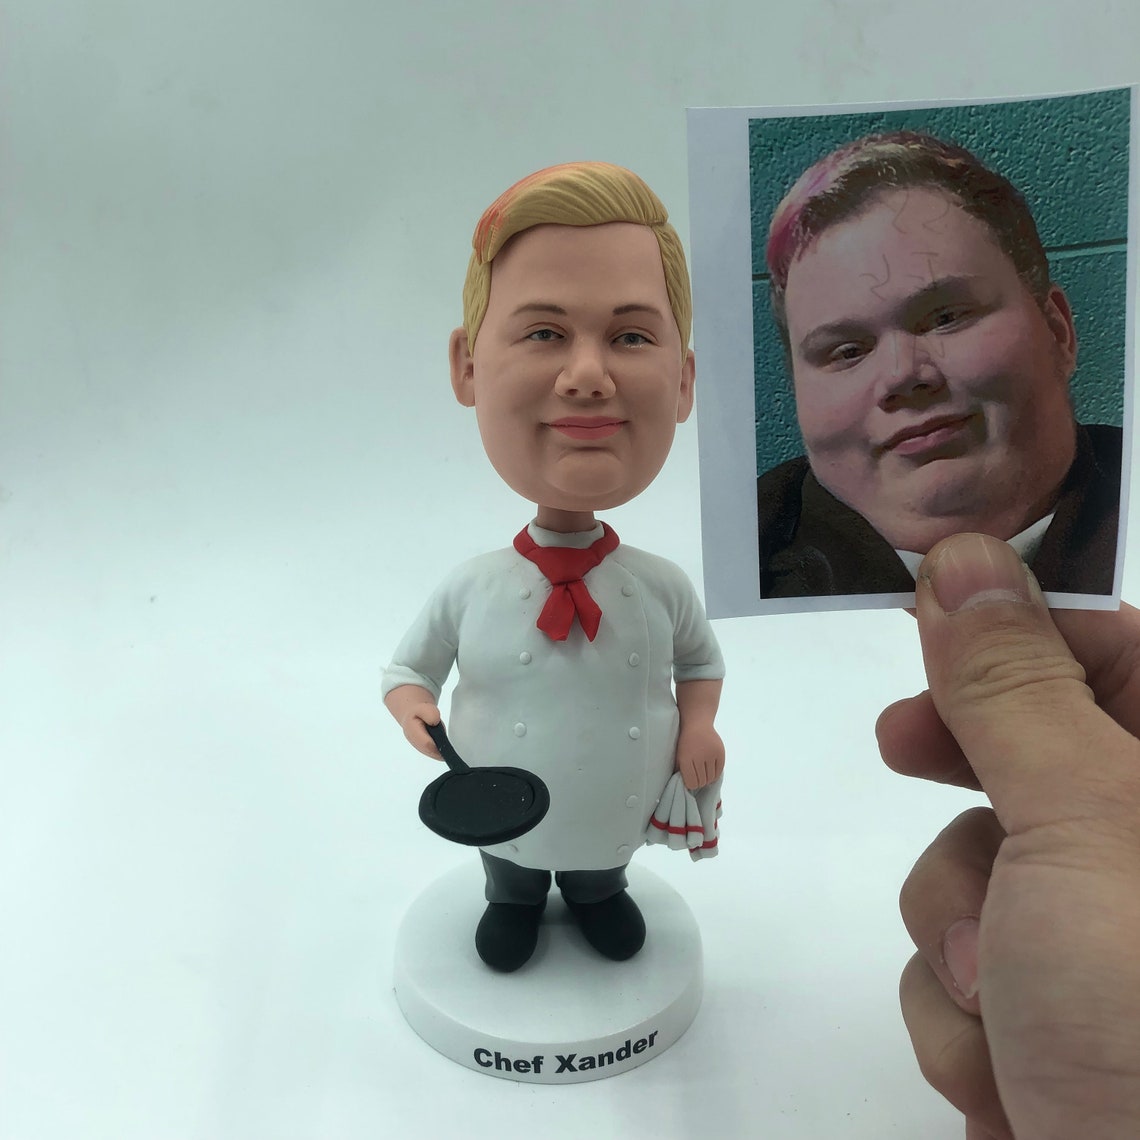 Yankees Thumbs Down Guy is now getting his own bobblehead – New